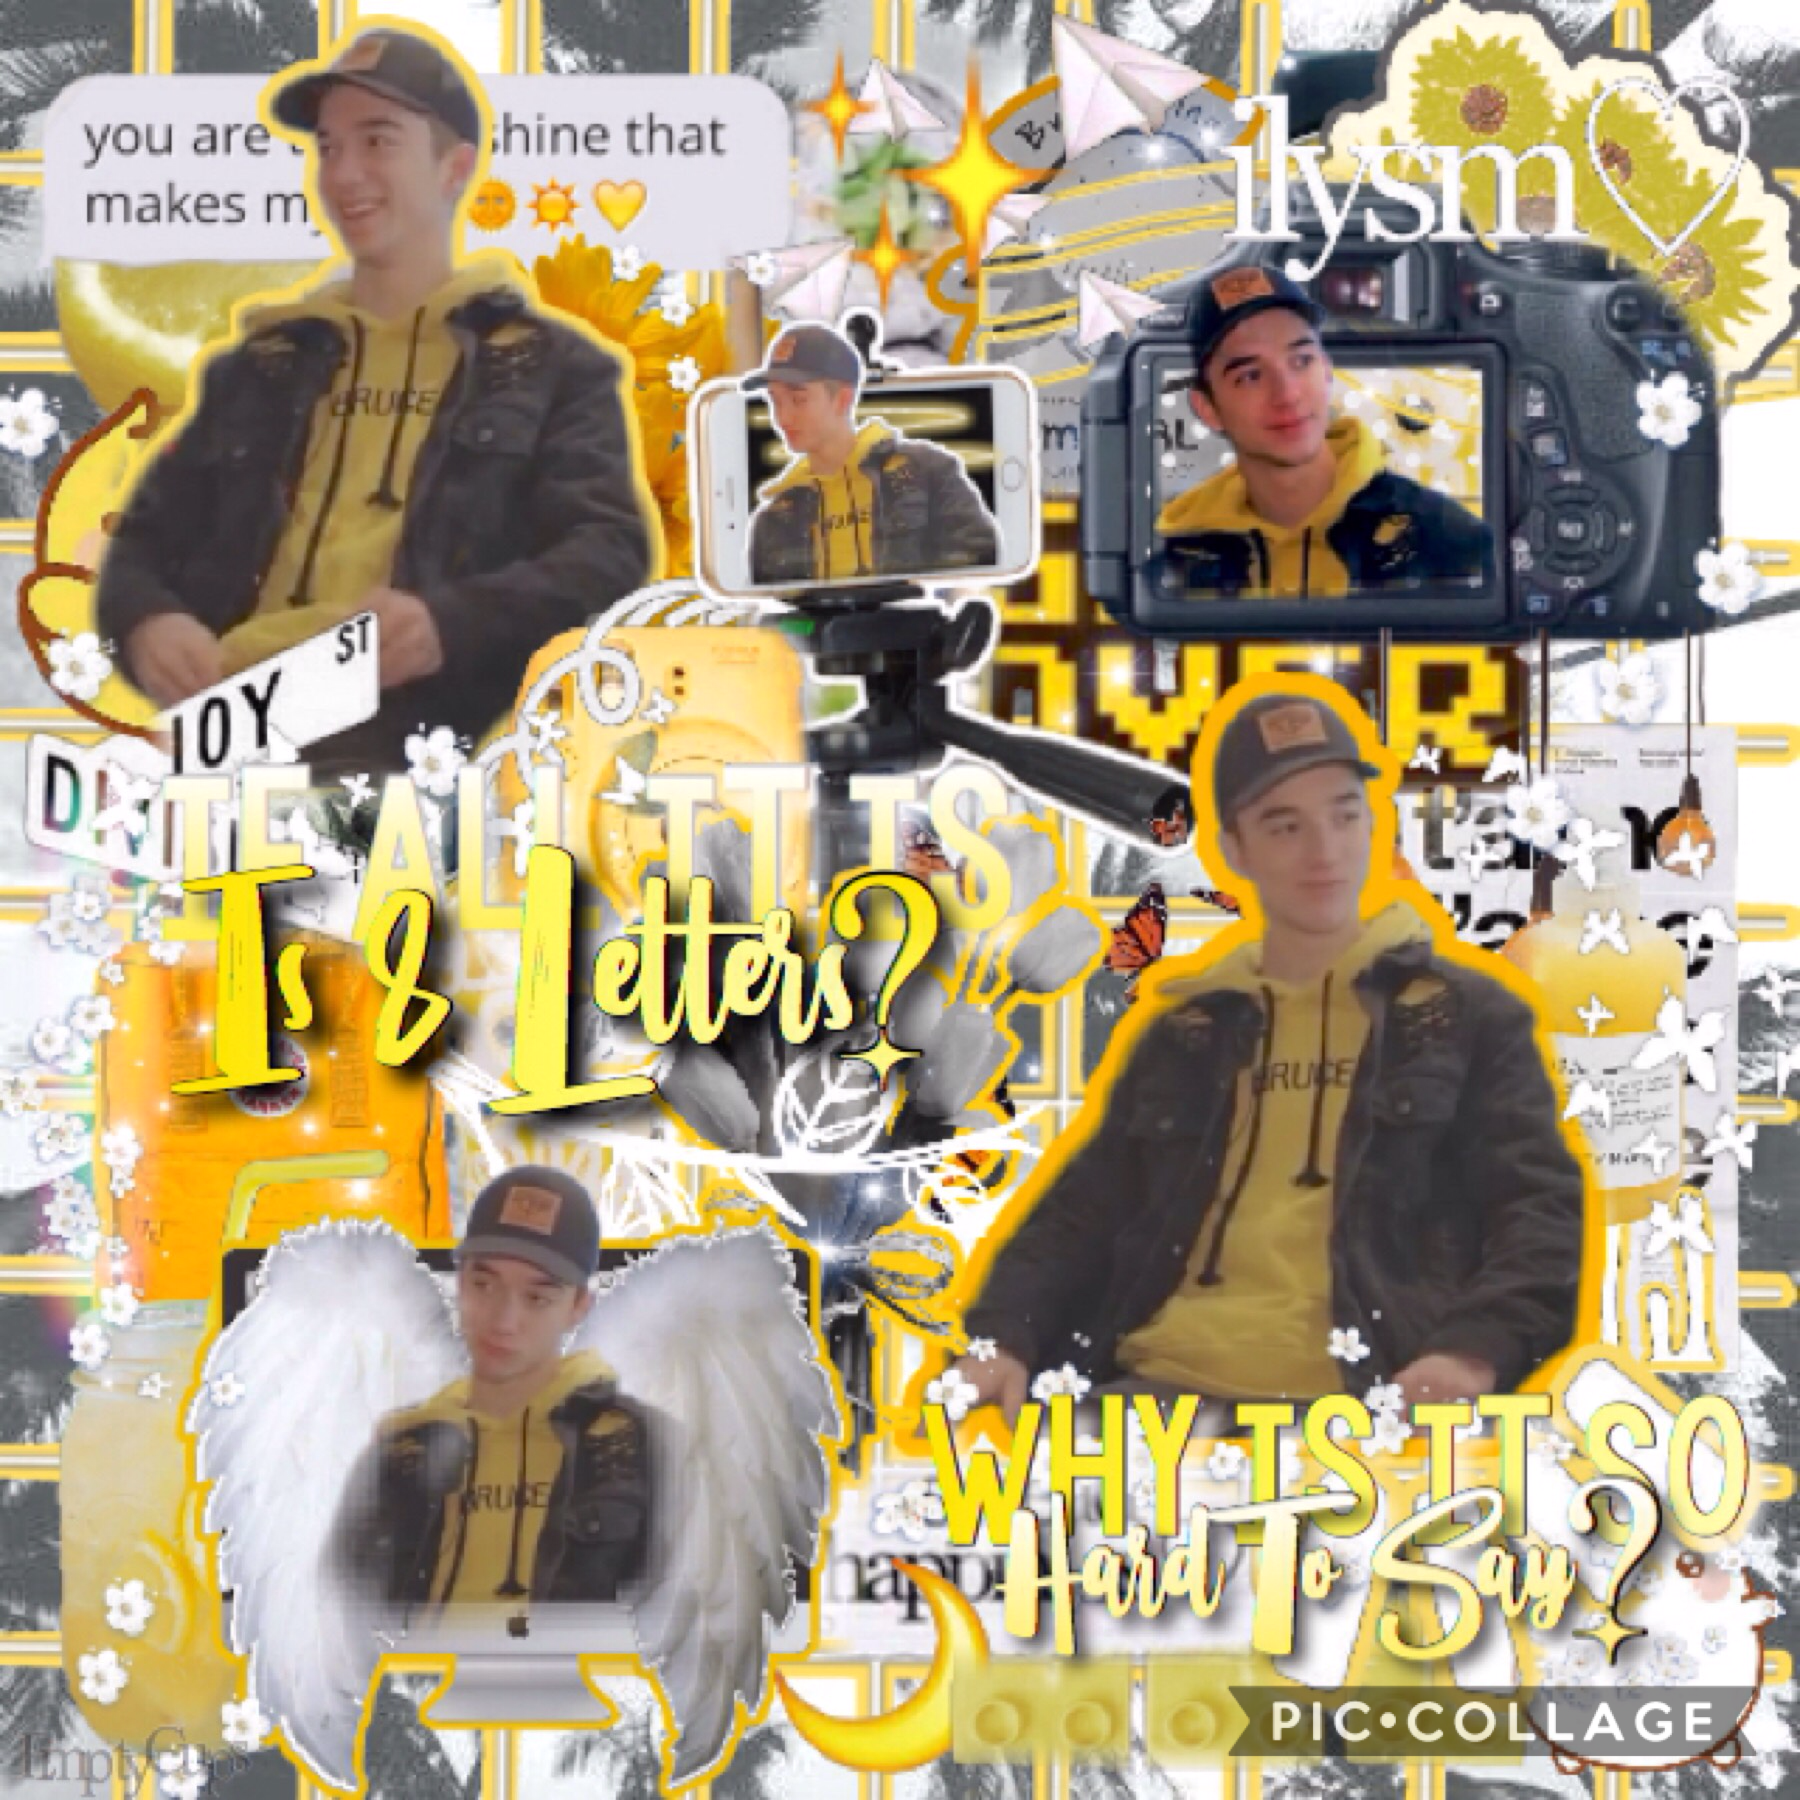 8 Letters? ✨ Click
Finally decided to make a WDW edit for
@limelightforlife @queenfashion121
-Please tell me what celeb to do next!-
Song OTC: 8 Letters
Artist(s): Why Don't We